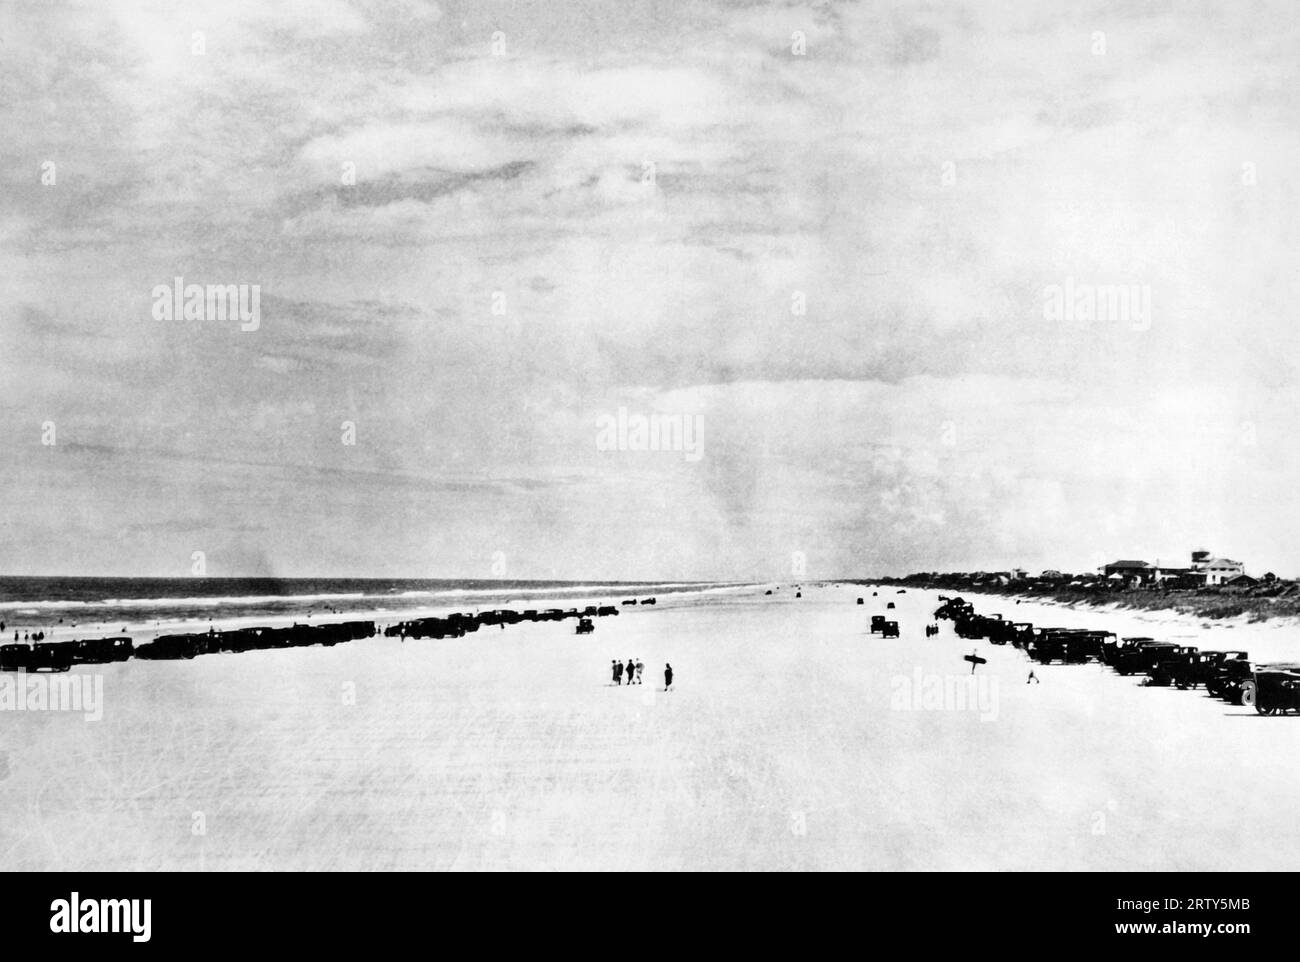 Ormond Beach, Daytona Beach, Florida: c. 1929 Speed races will be held here in February on Daytona Beach between Frank Lockhart of California, JM White of Philadelphia, and Malcolm Campbell of London in an effort to break Major Seagrave's record of 203mph set here last March. Stock Photo